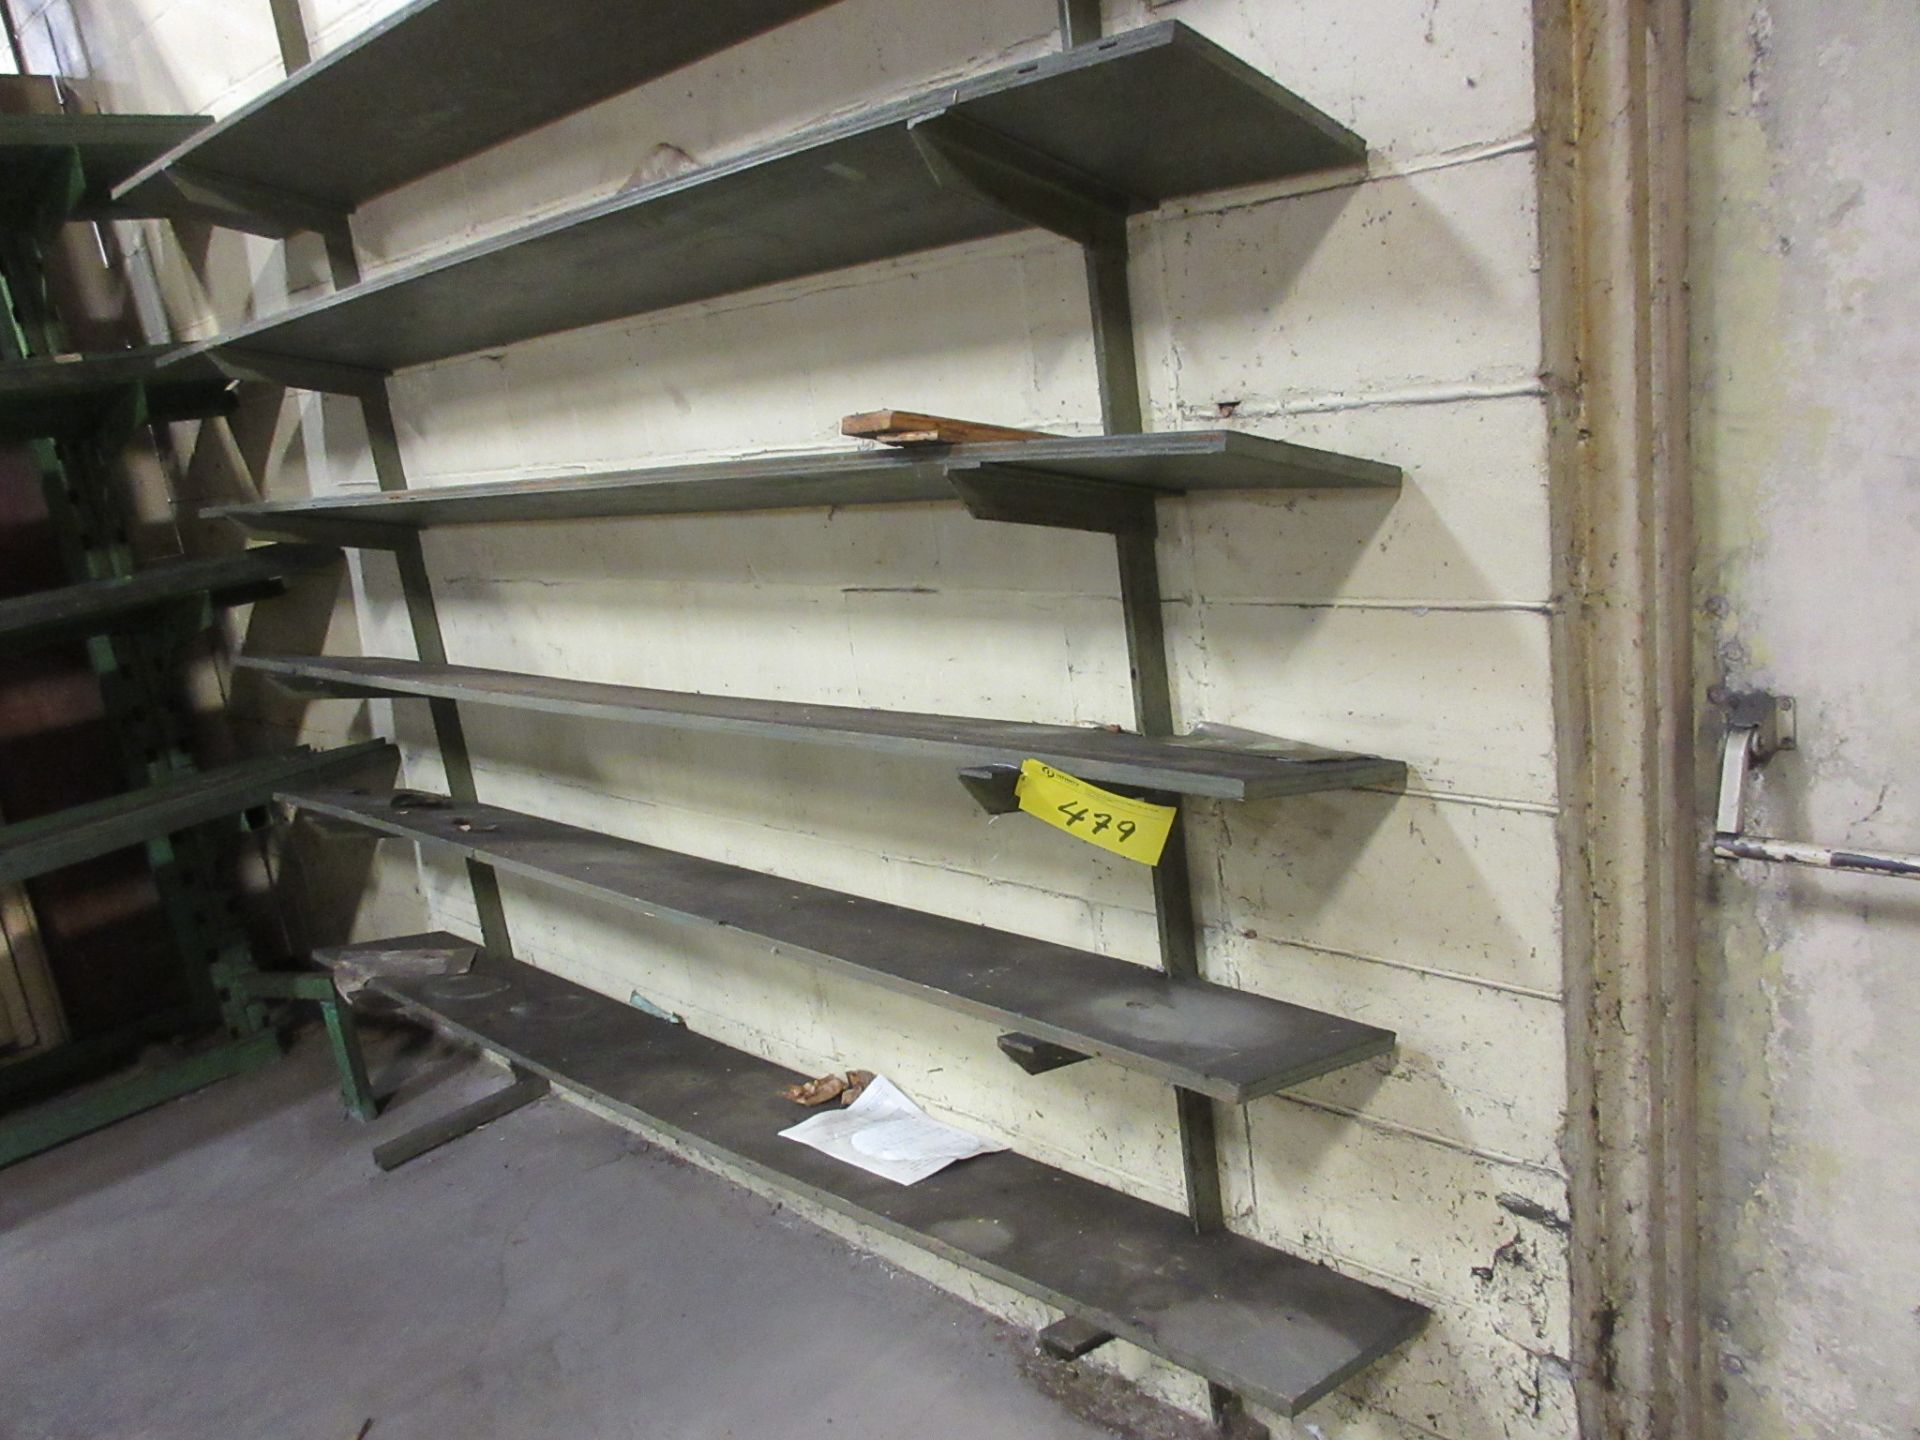 LOT OF (3) APPROX. 8'W X 8'H X 14"L WALL MOUNTED SHELVING UNITS (5 UPRIGHTS, 7-LEVELS)